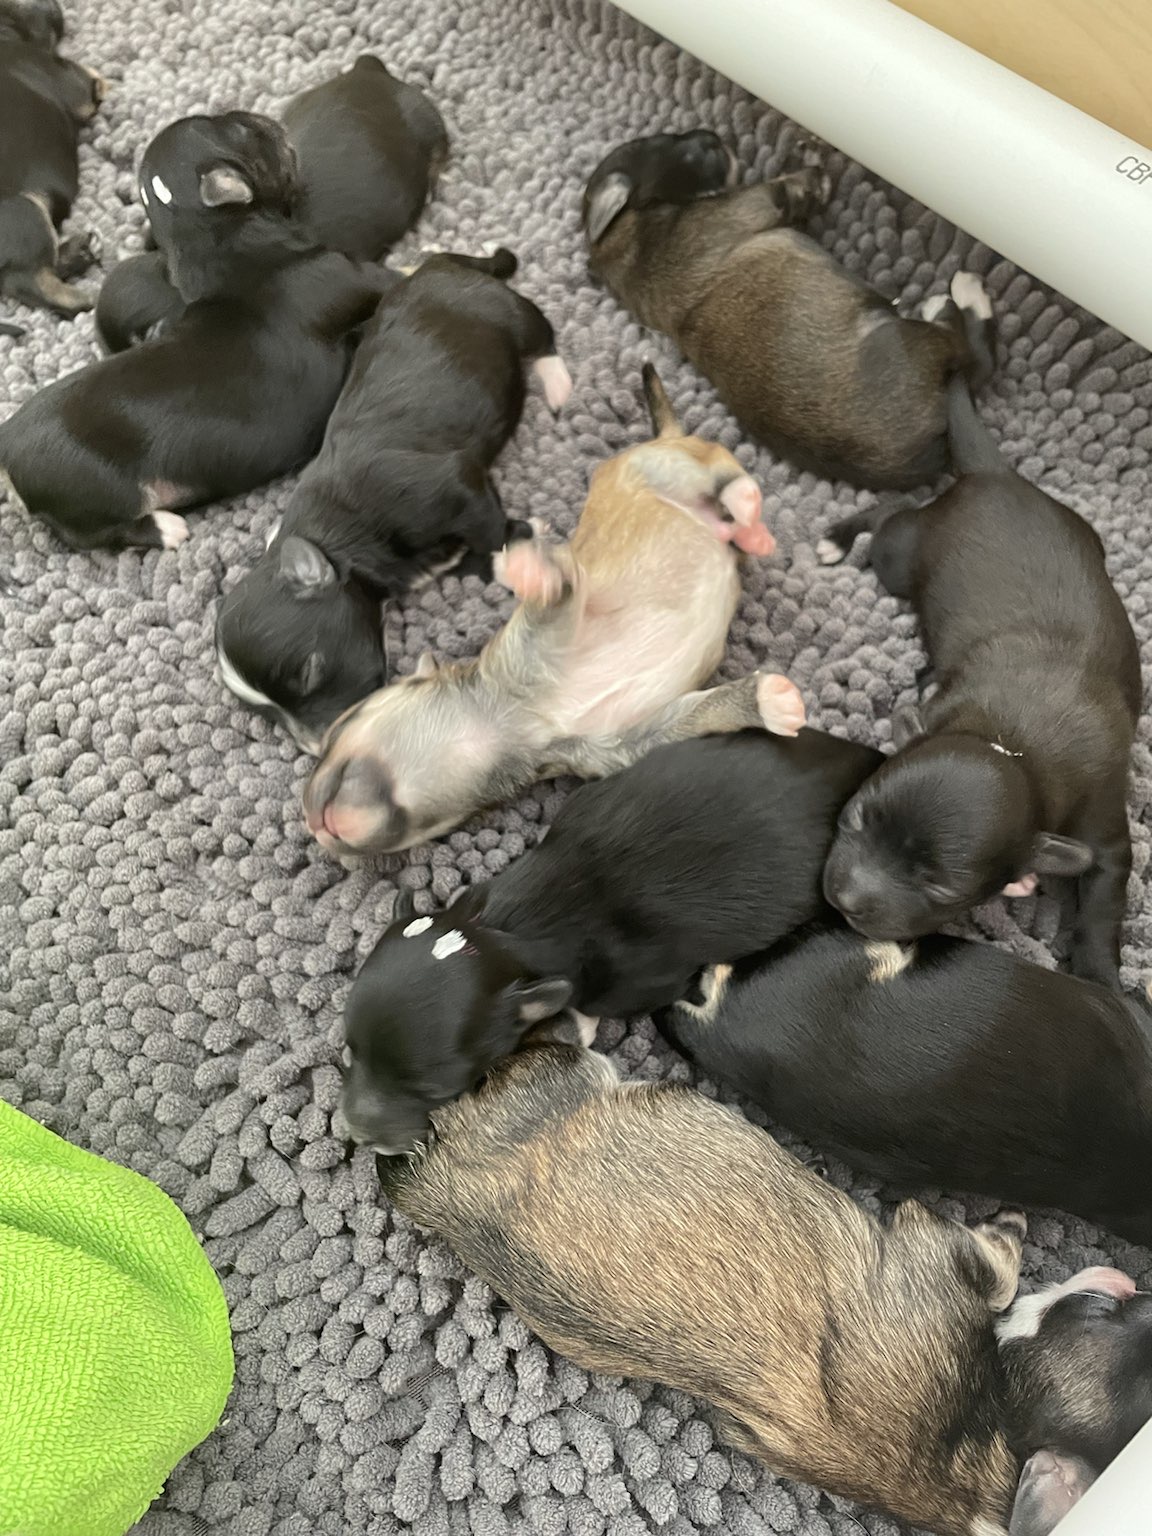 all sleeping after their feed